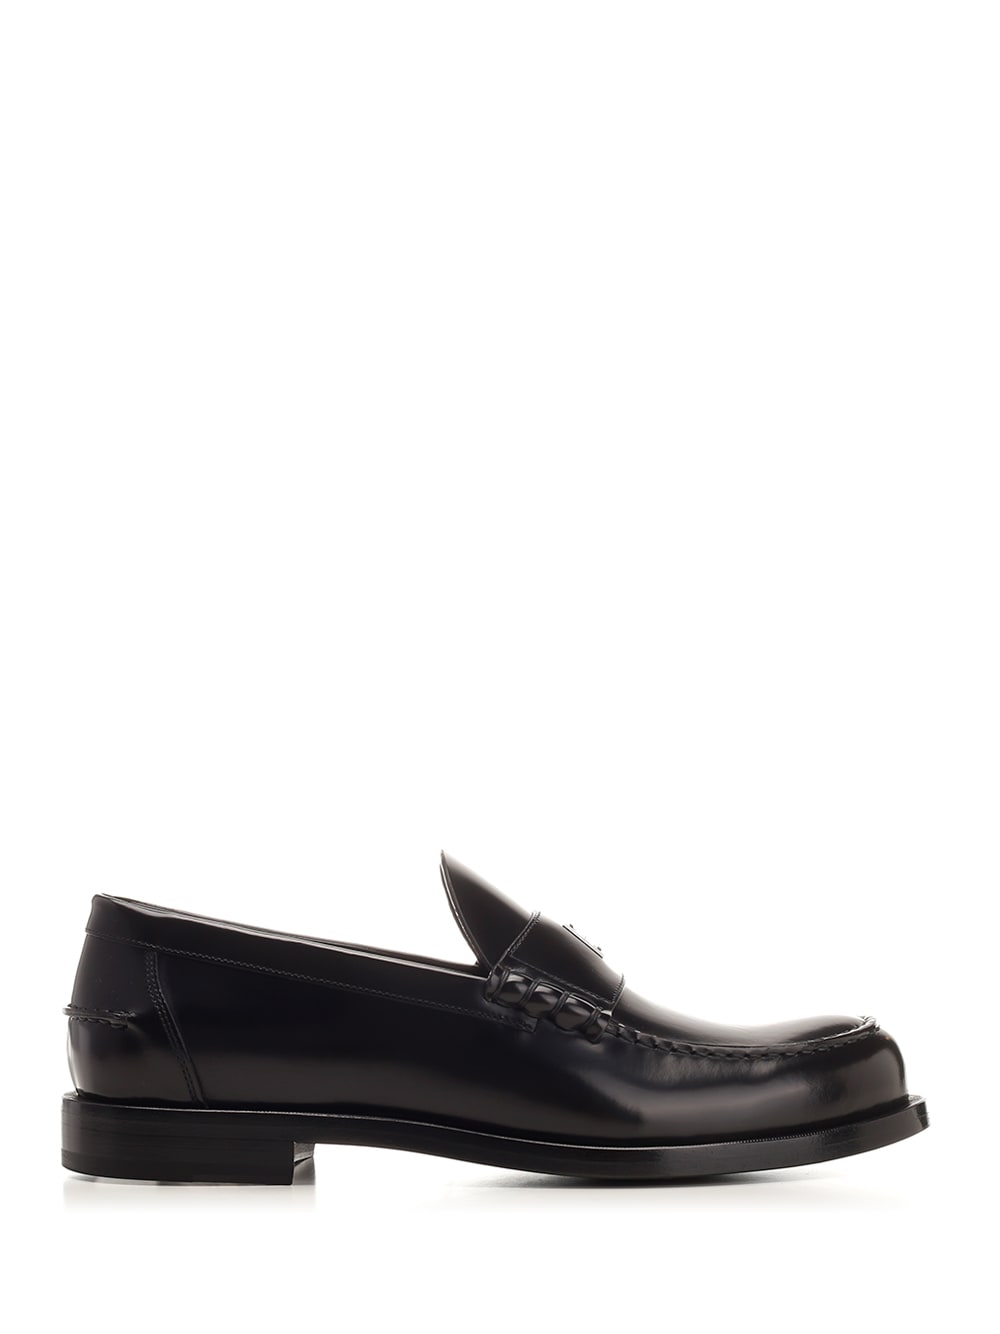 GIVENCHY BRUSHED LEATHER LOAFERS